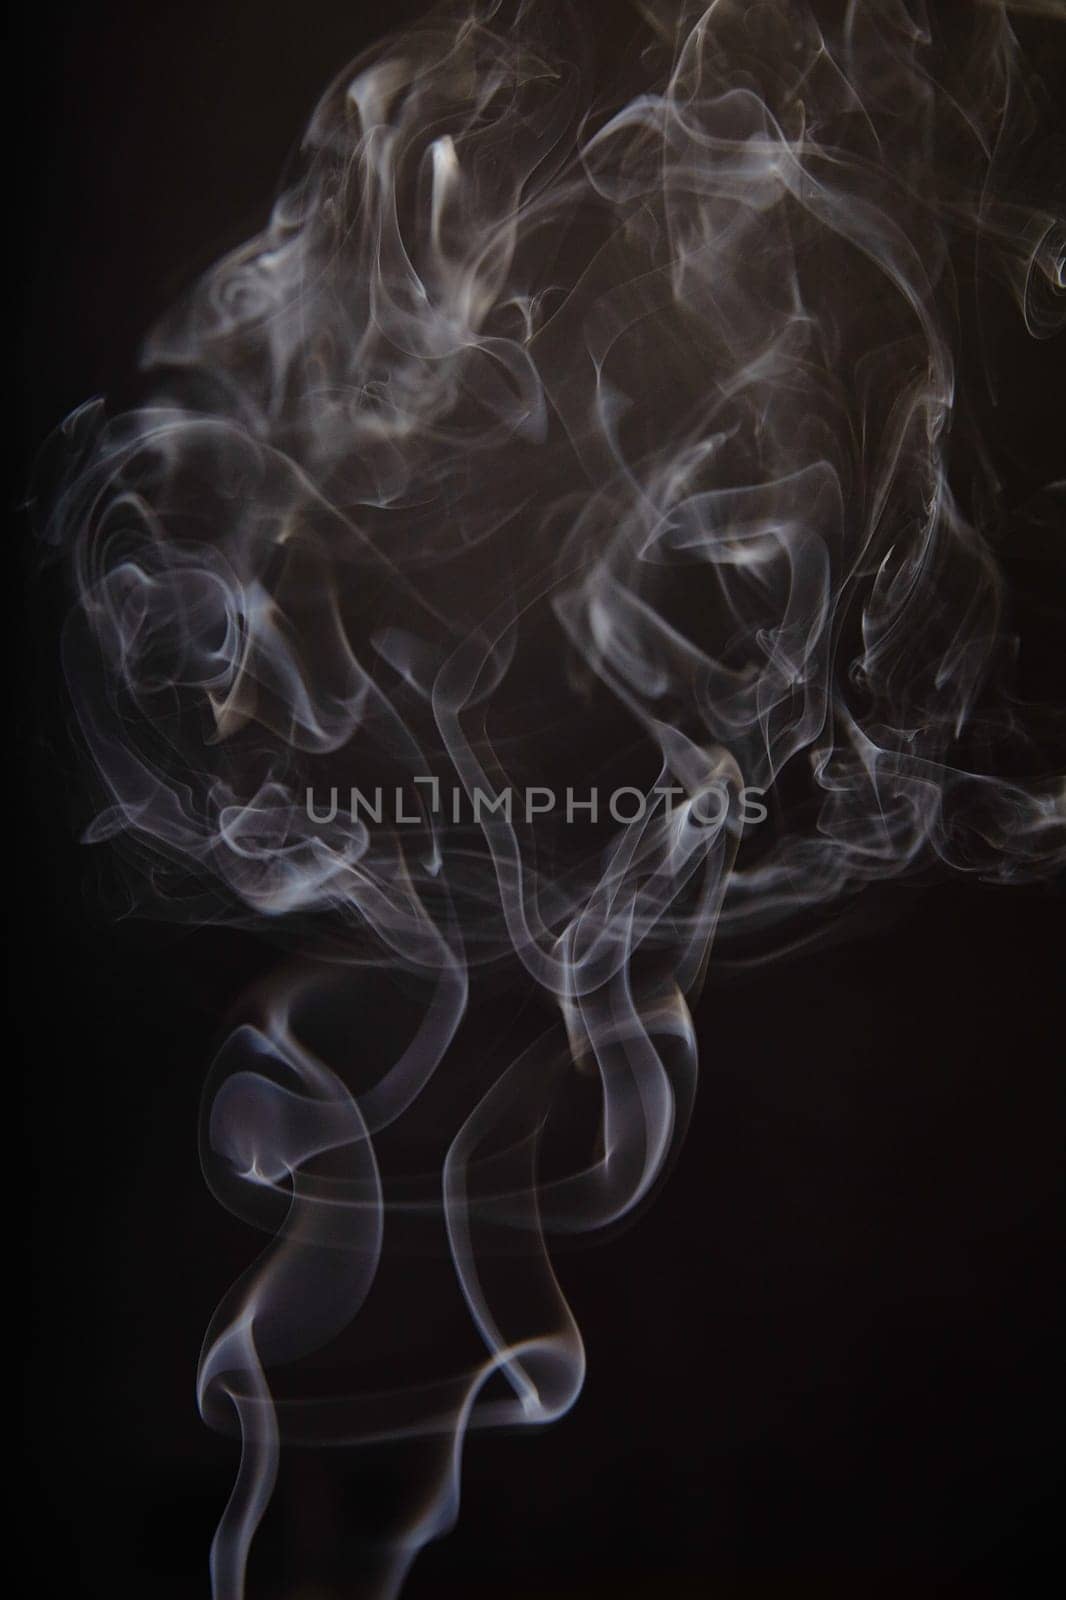 Ethereal Smoke Dance Against Dark Background by njproductions